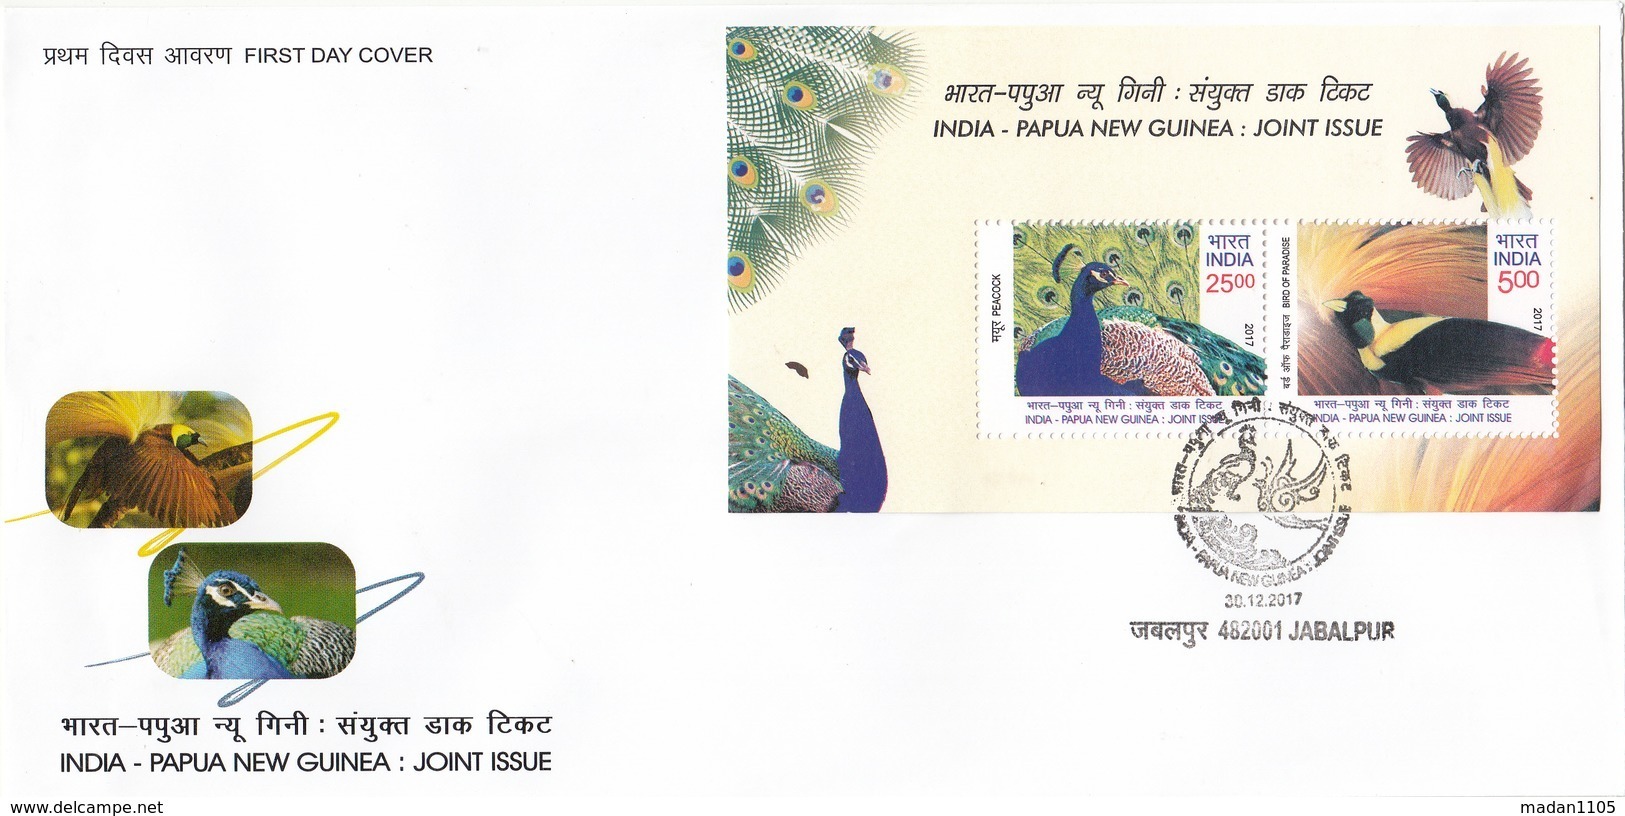 INDIA 2017,PAPUA  NEW GUINEA FDC MS Joint Issue Miniature Sheet, First Day Cover, Jabalpur Cancellation. - FDC